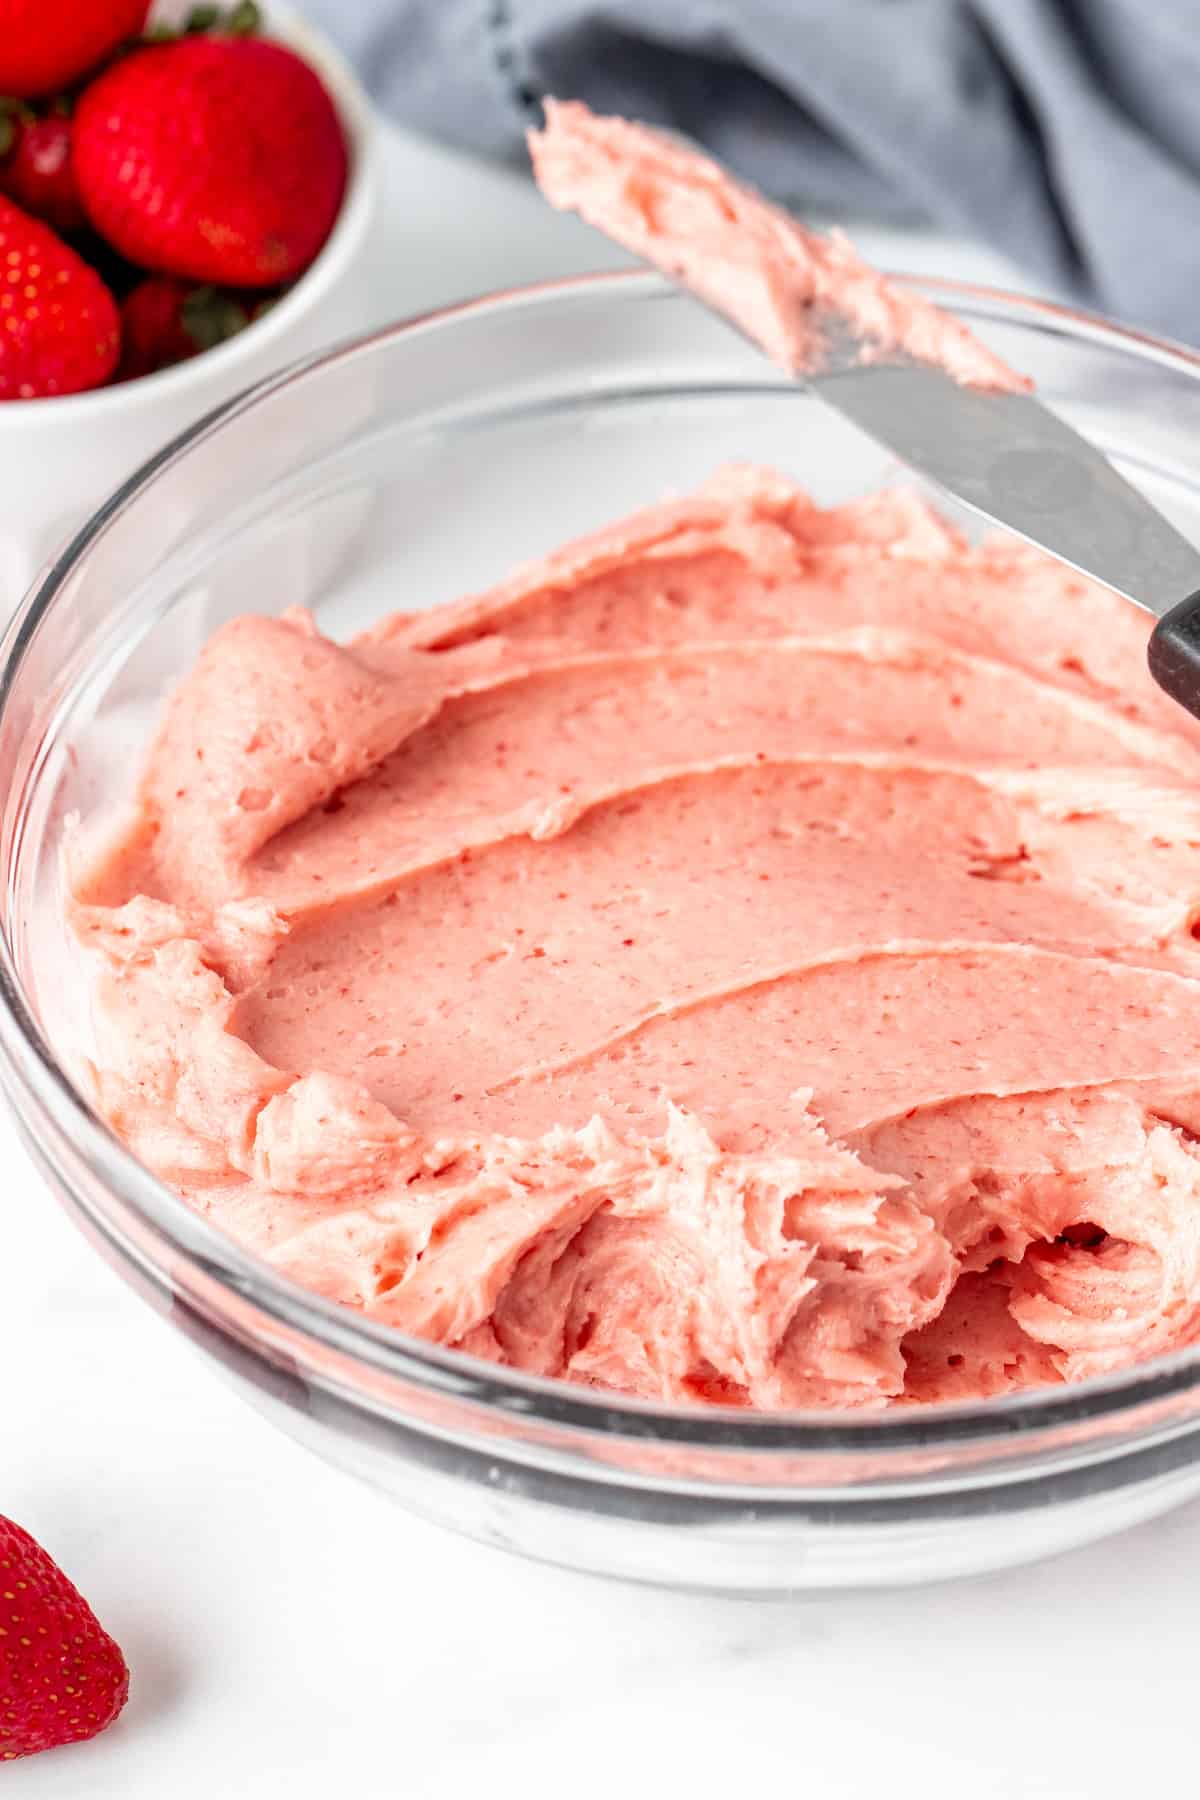 Bowl of creamy strawberry frosting